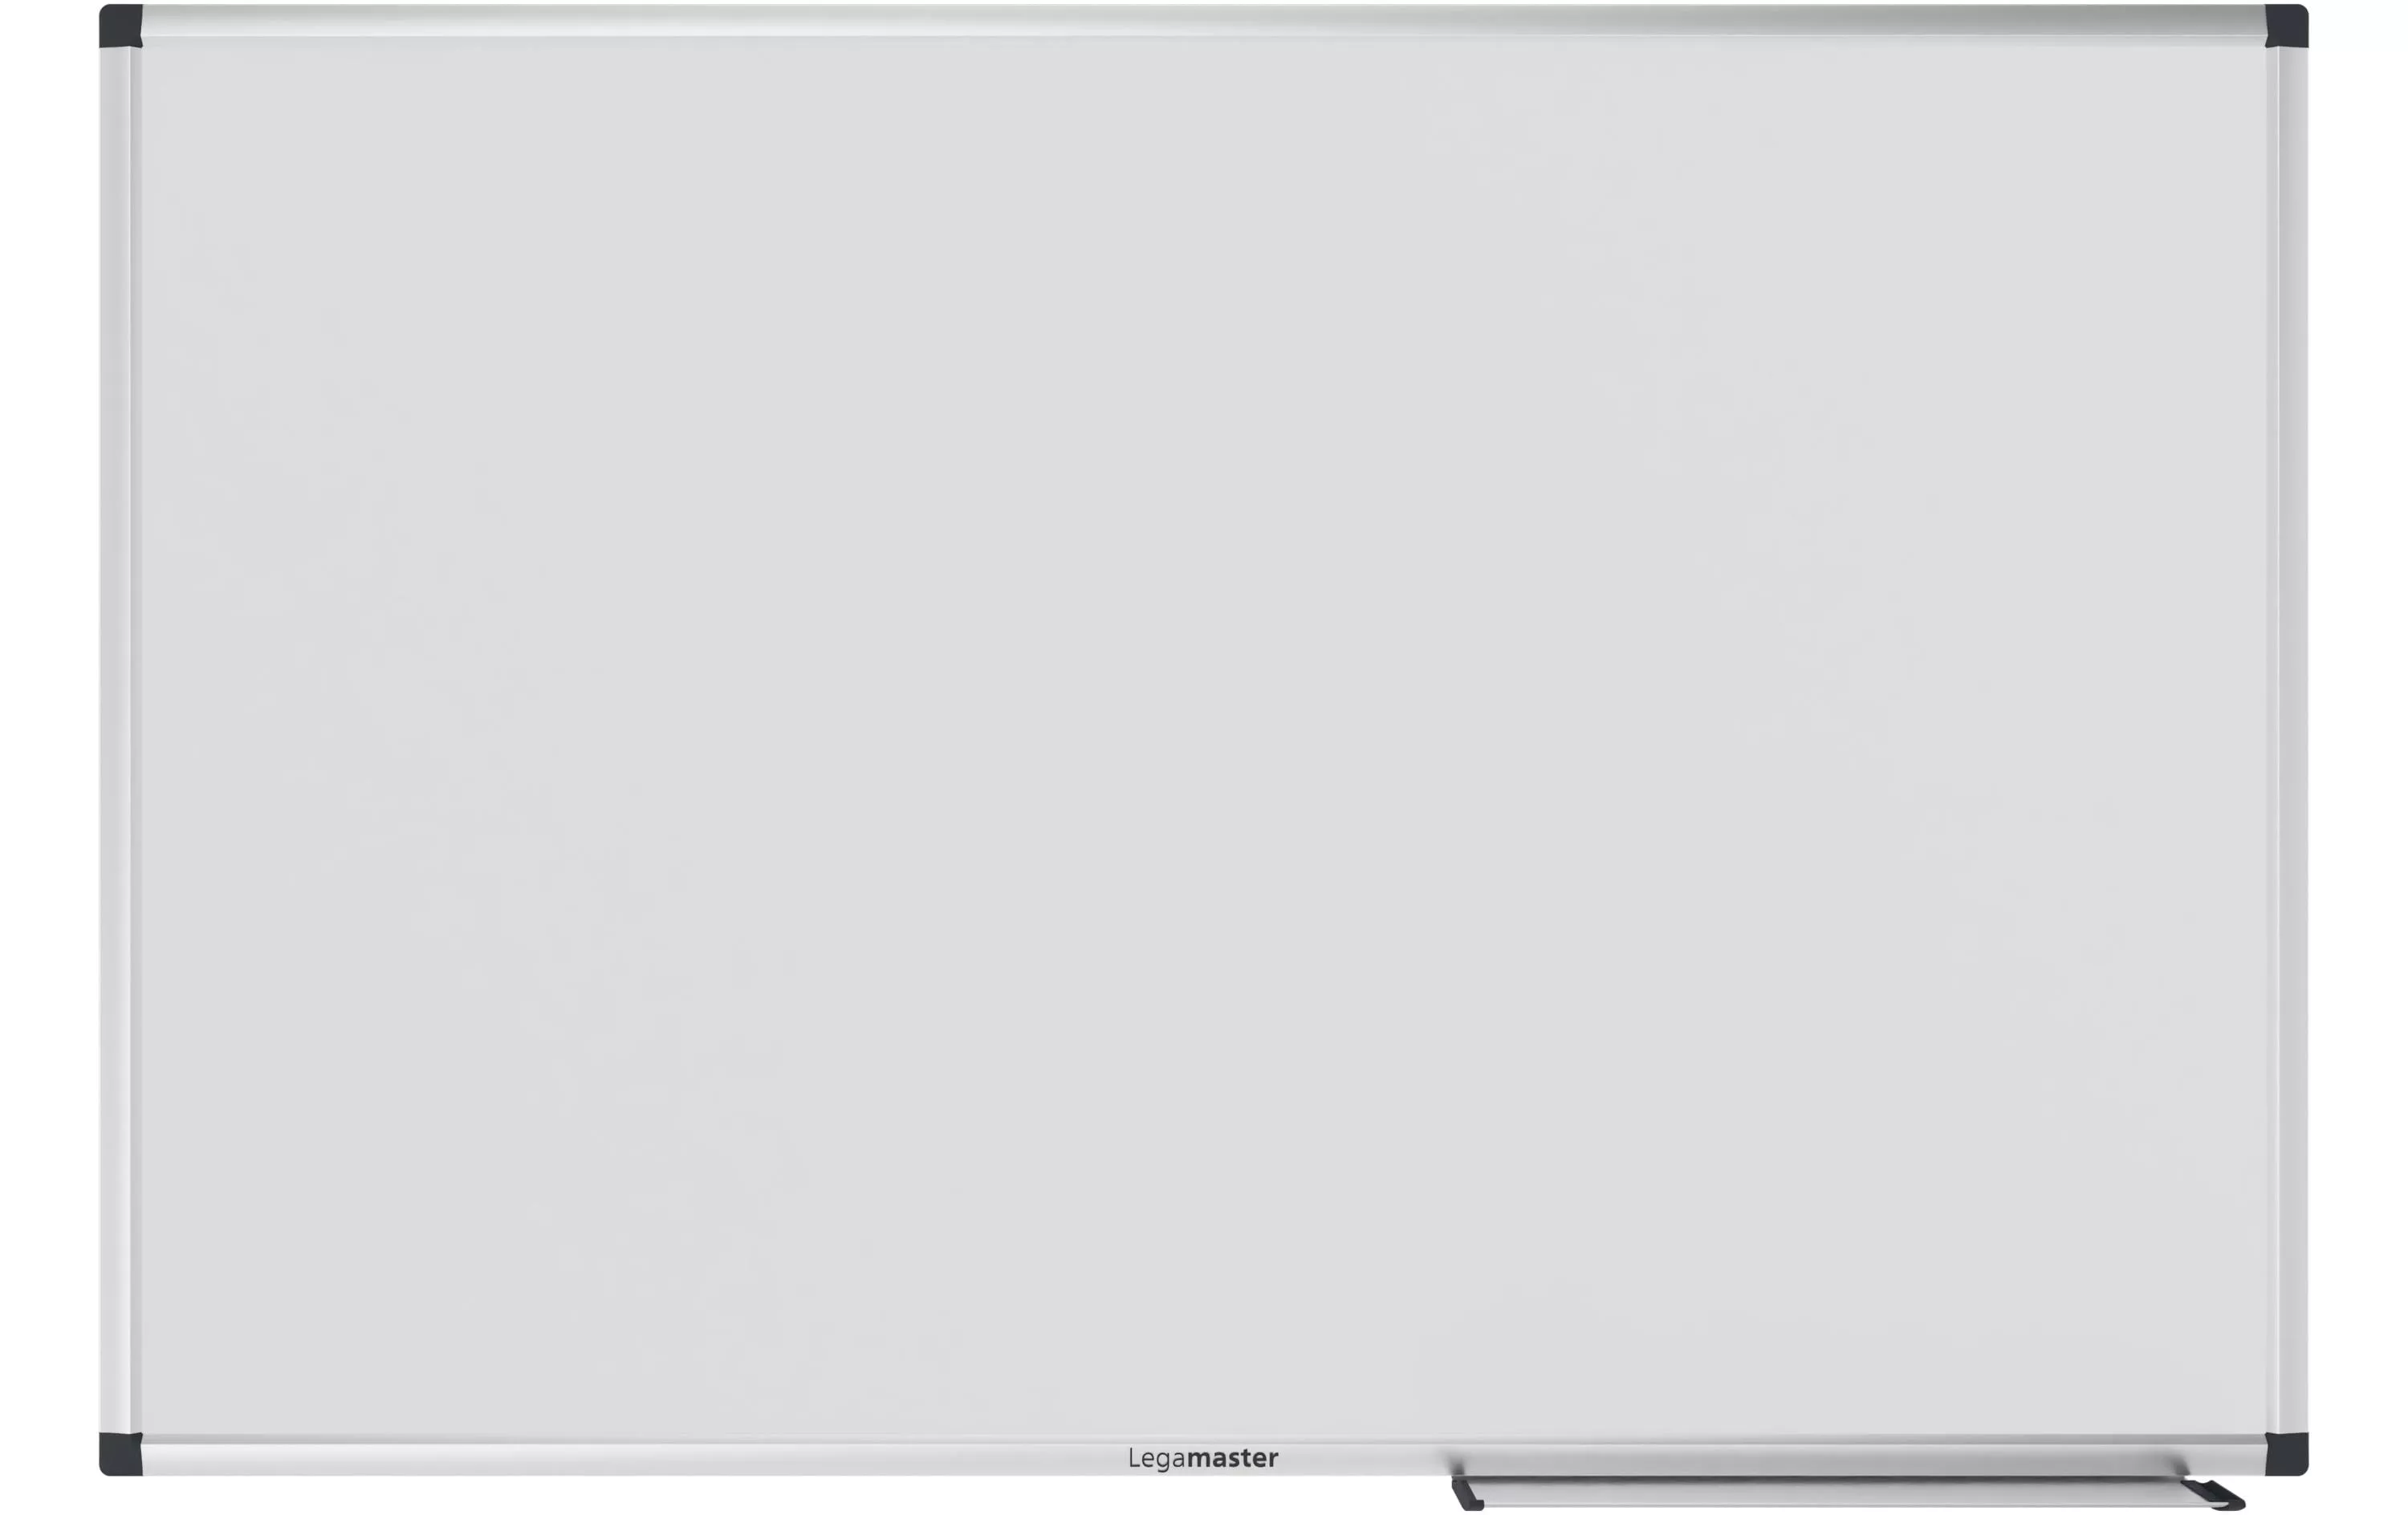 Magnethaftendes Whiteboard Unite Plus 60 cm x 90 cm, Weiss